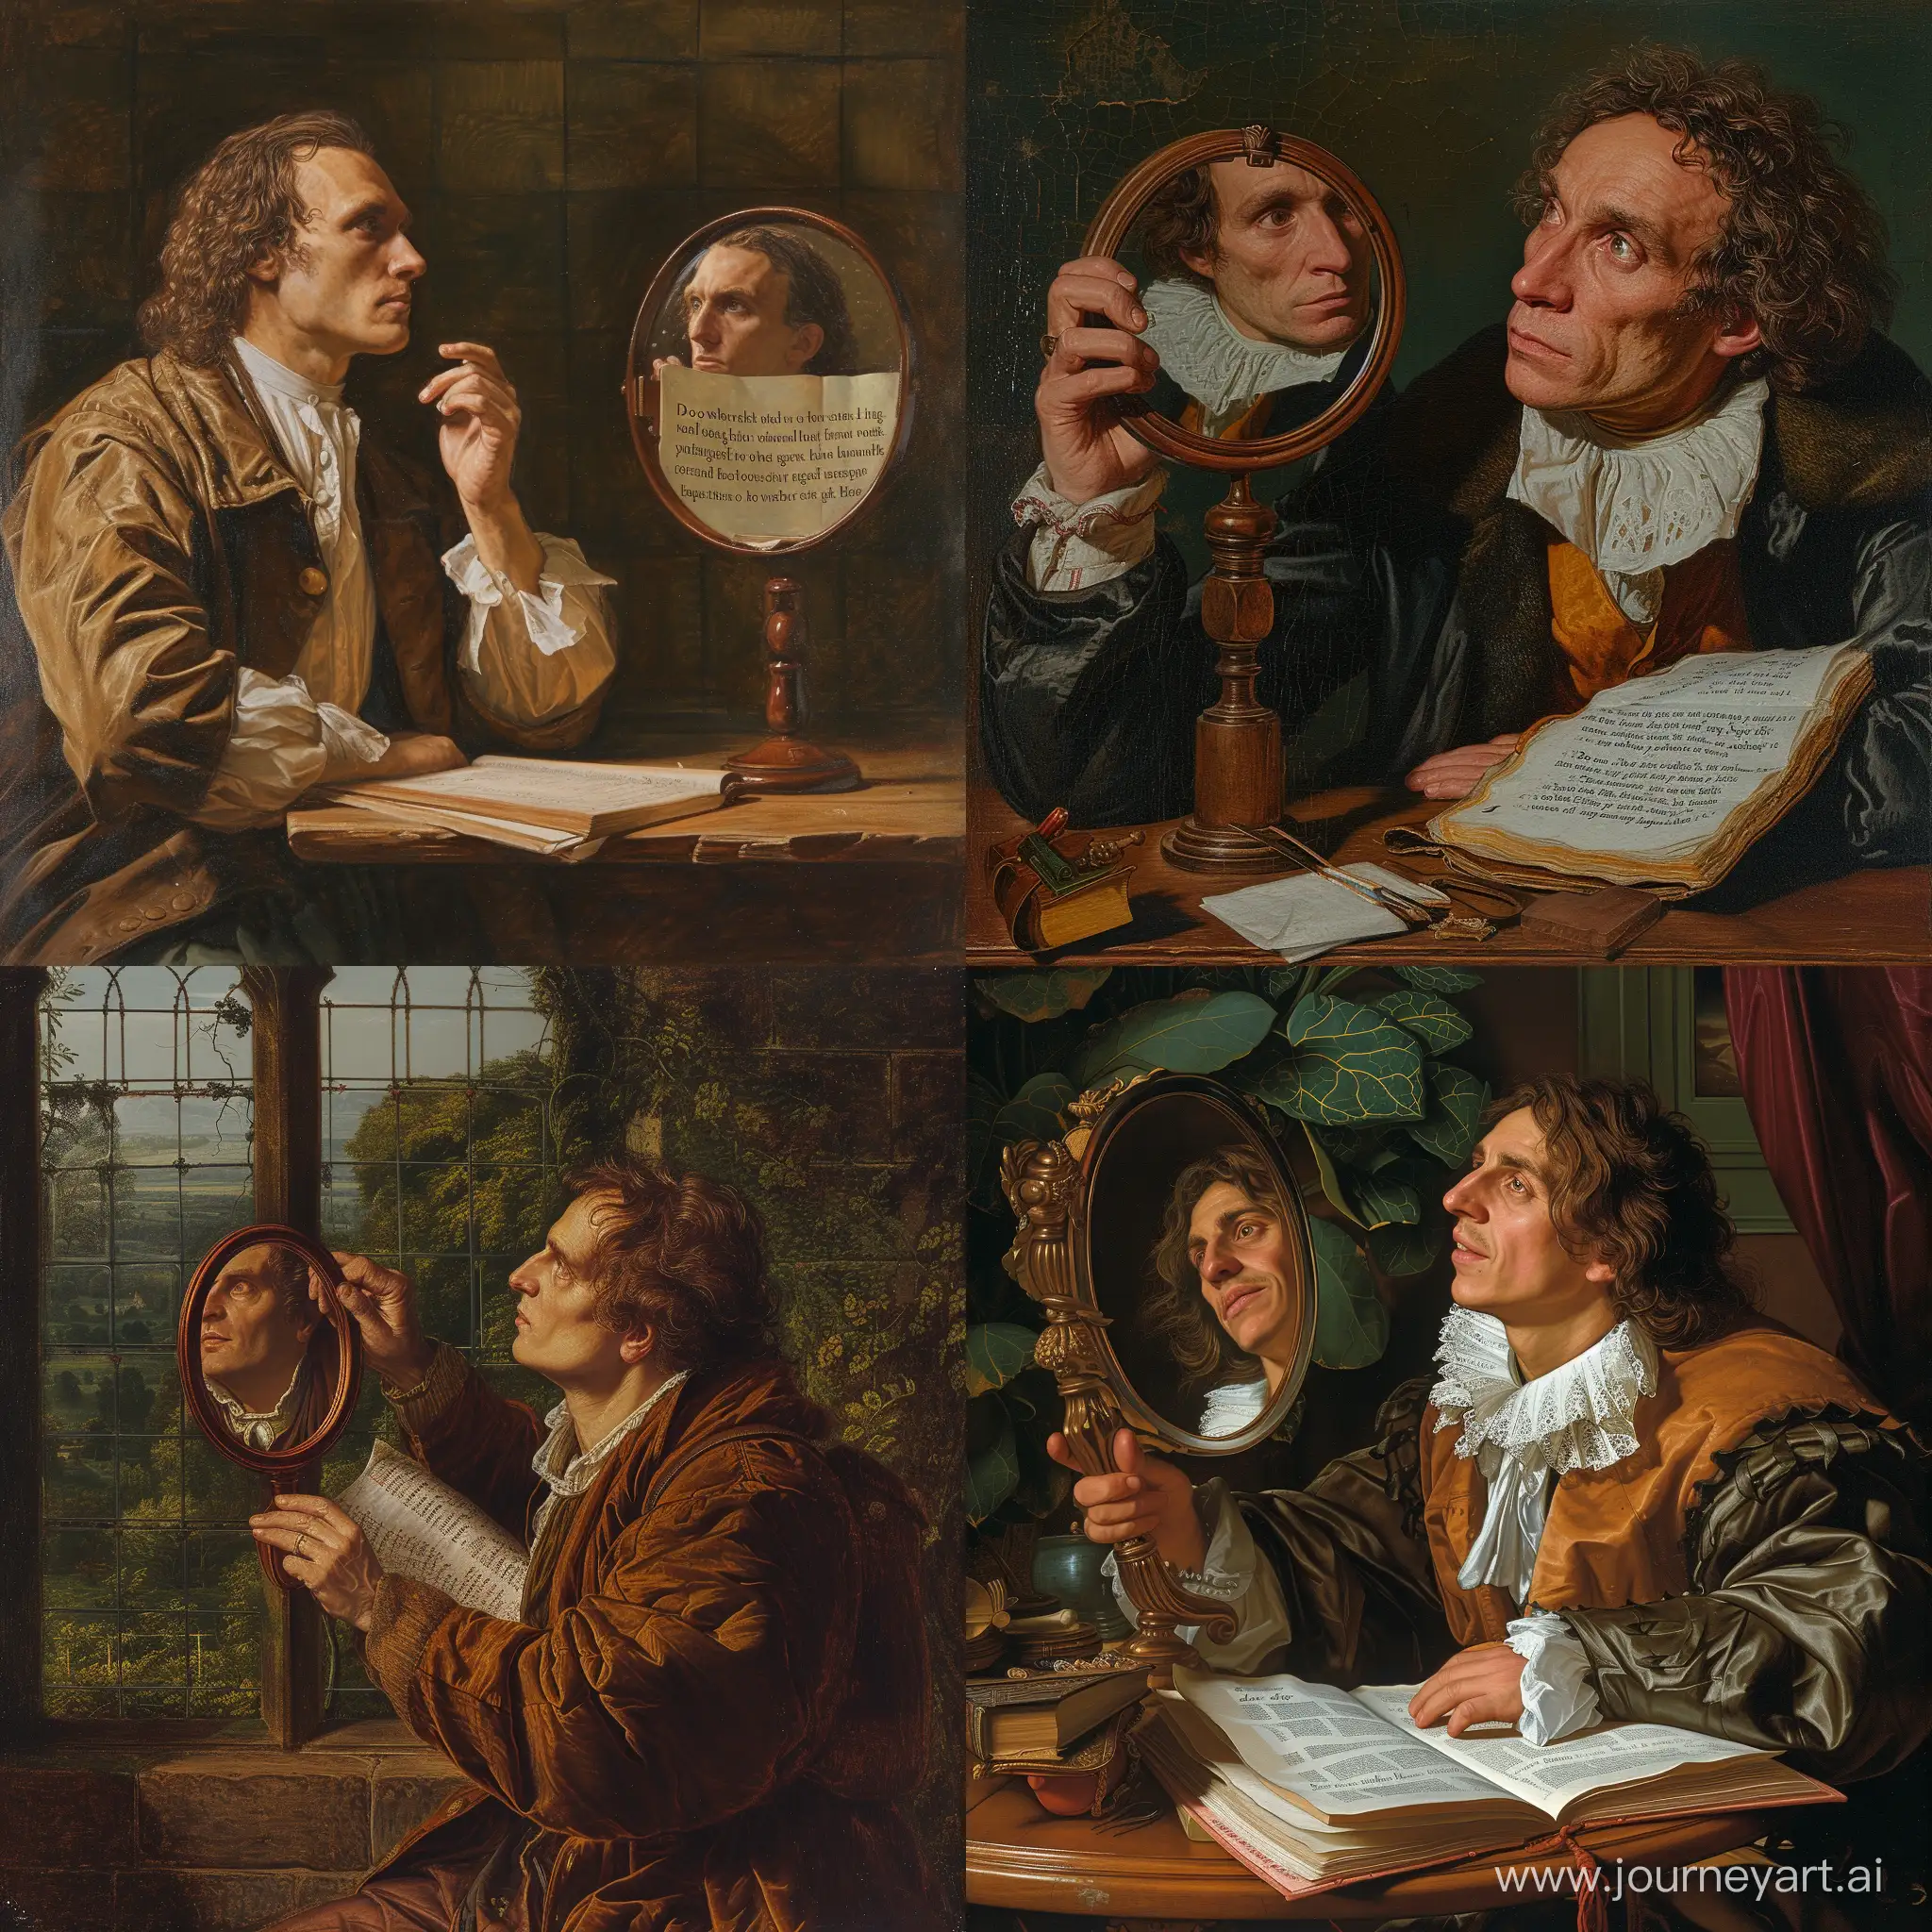 Picture of George Herbert looking into a hand mirror and seeing in his reflection him reading the words:   “Do not wait; the time will never be 'just right.' Start where you stand, and work with whatever tools you may have at your command, and better tools will be found as you go along.”